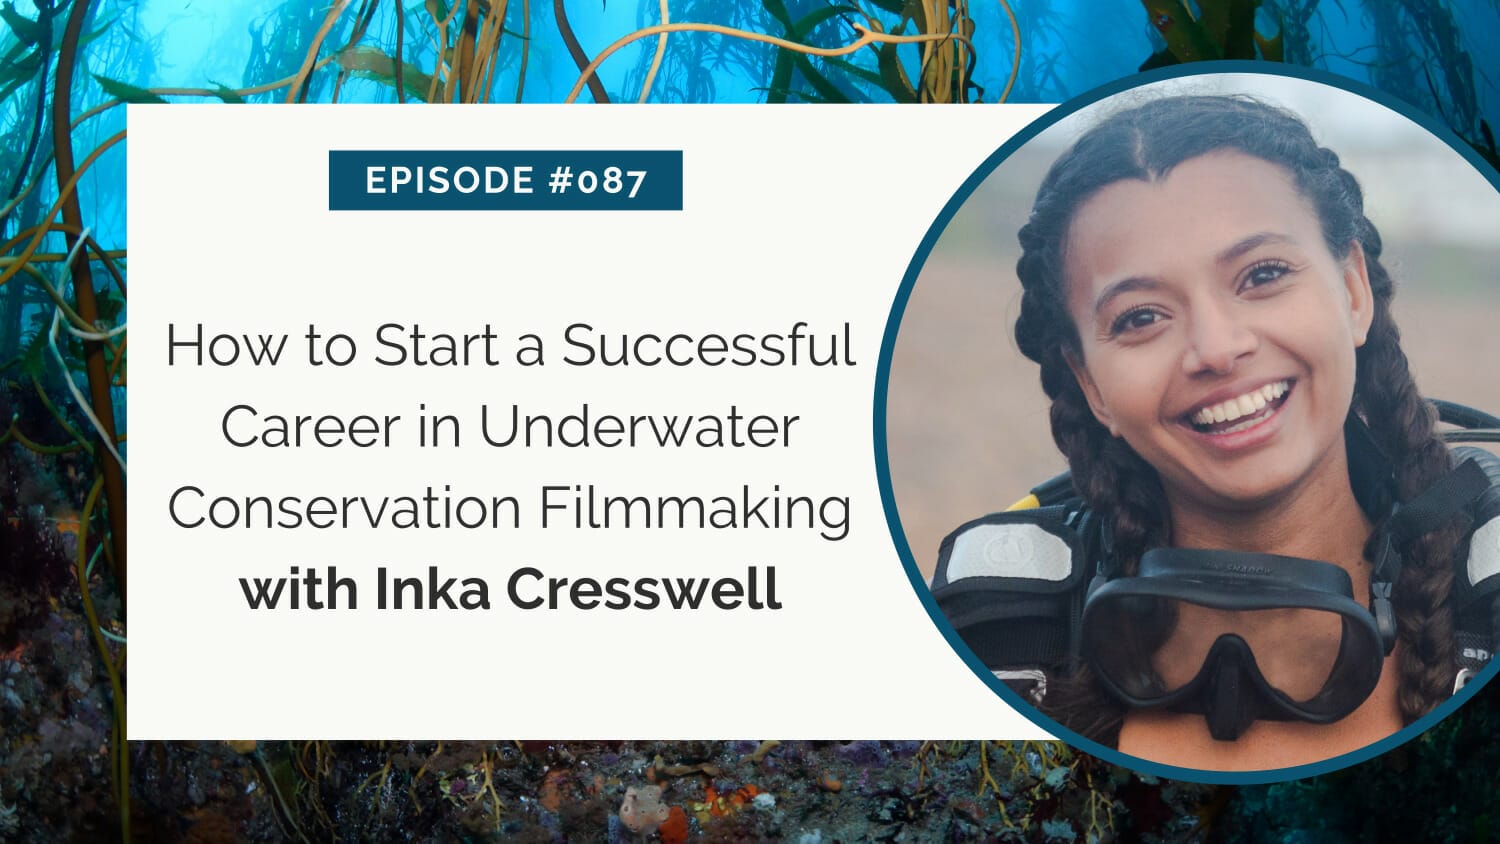 Episode #087: a woman in diving gear smiles cheerfully, promoting a discussion on beginning a career in underwater conservation filmmaking with inka cresswell.